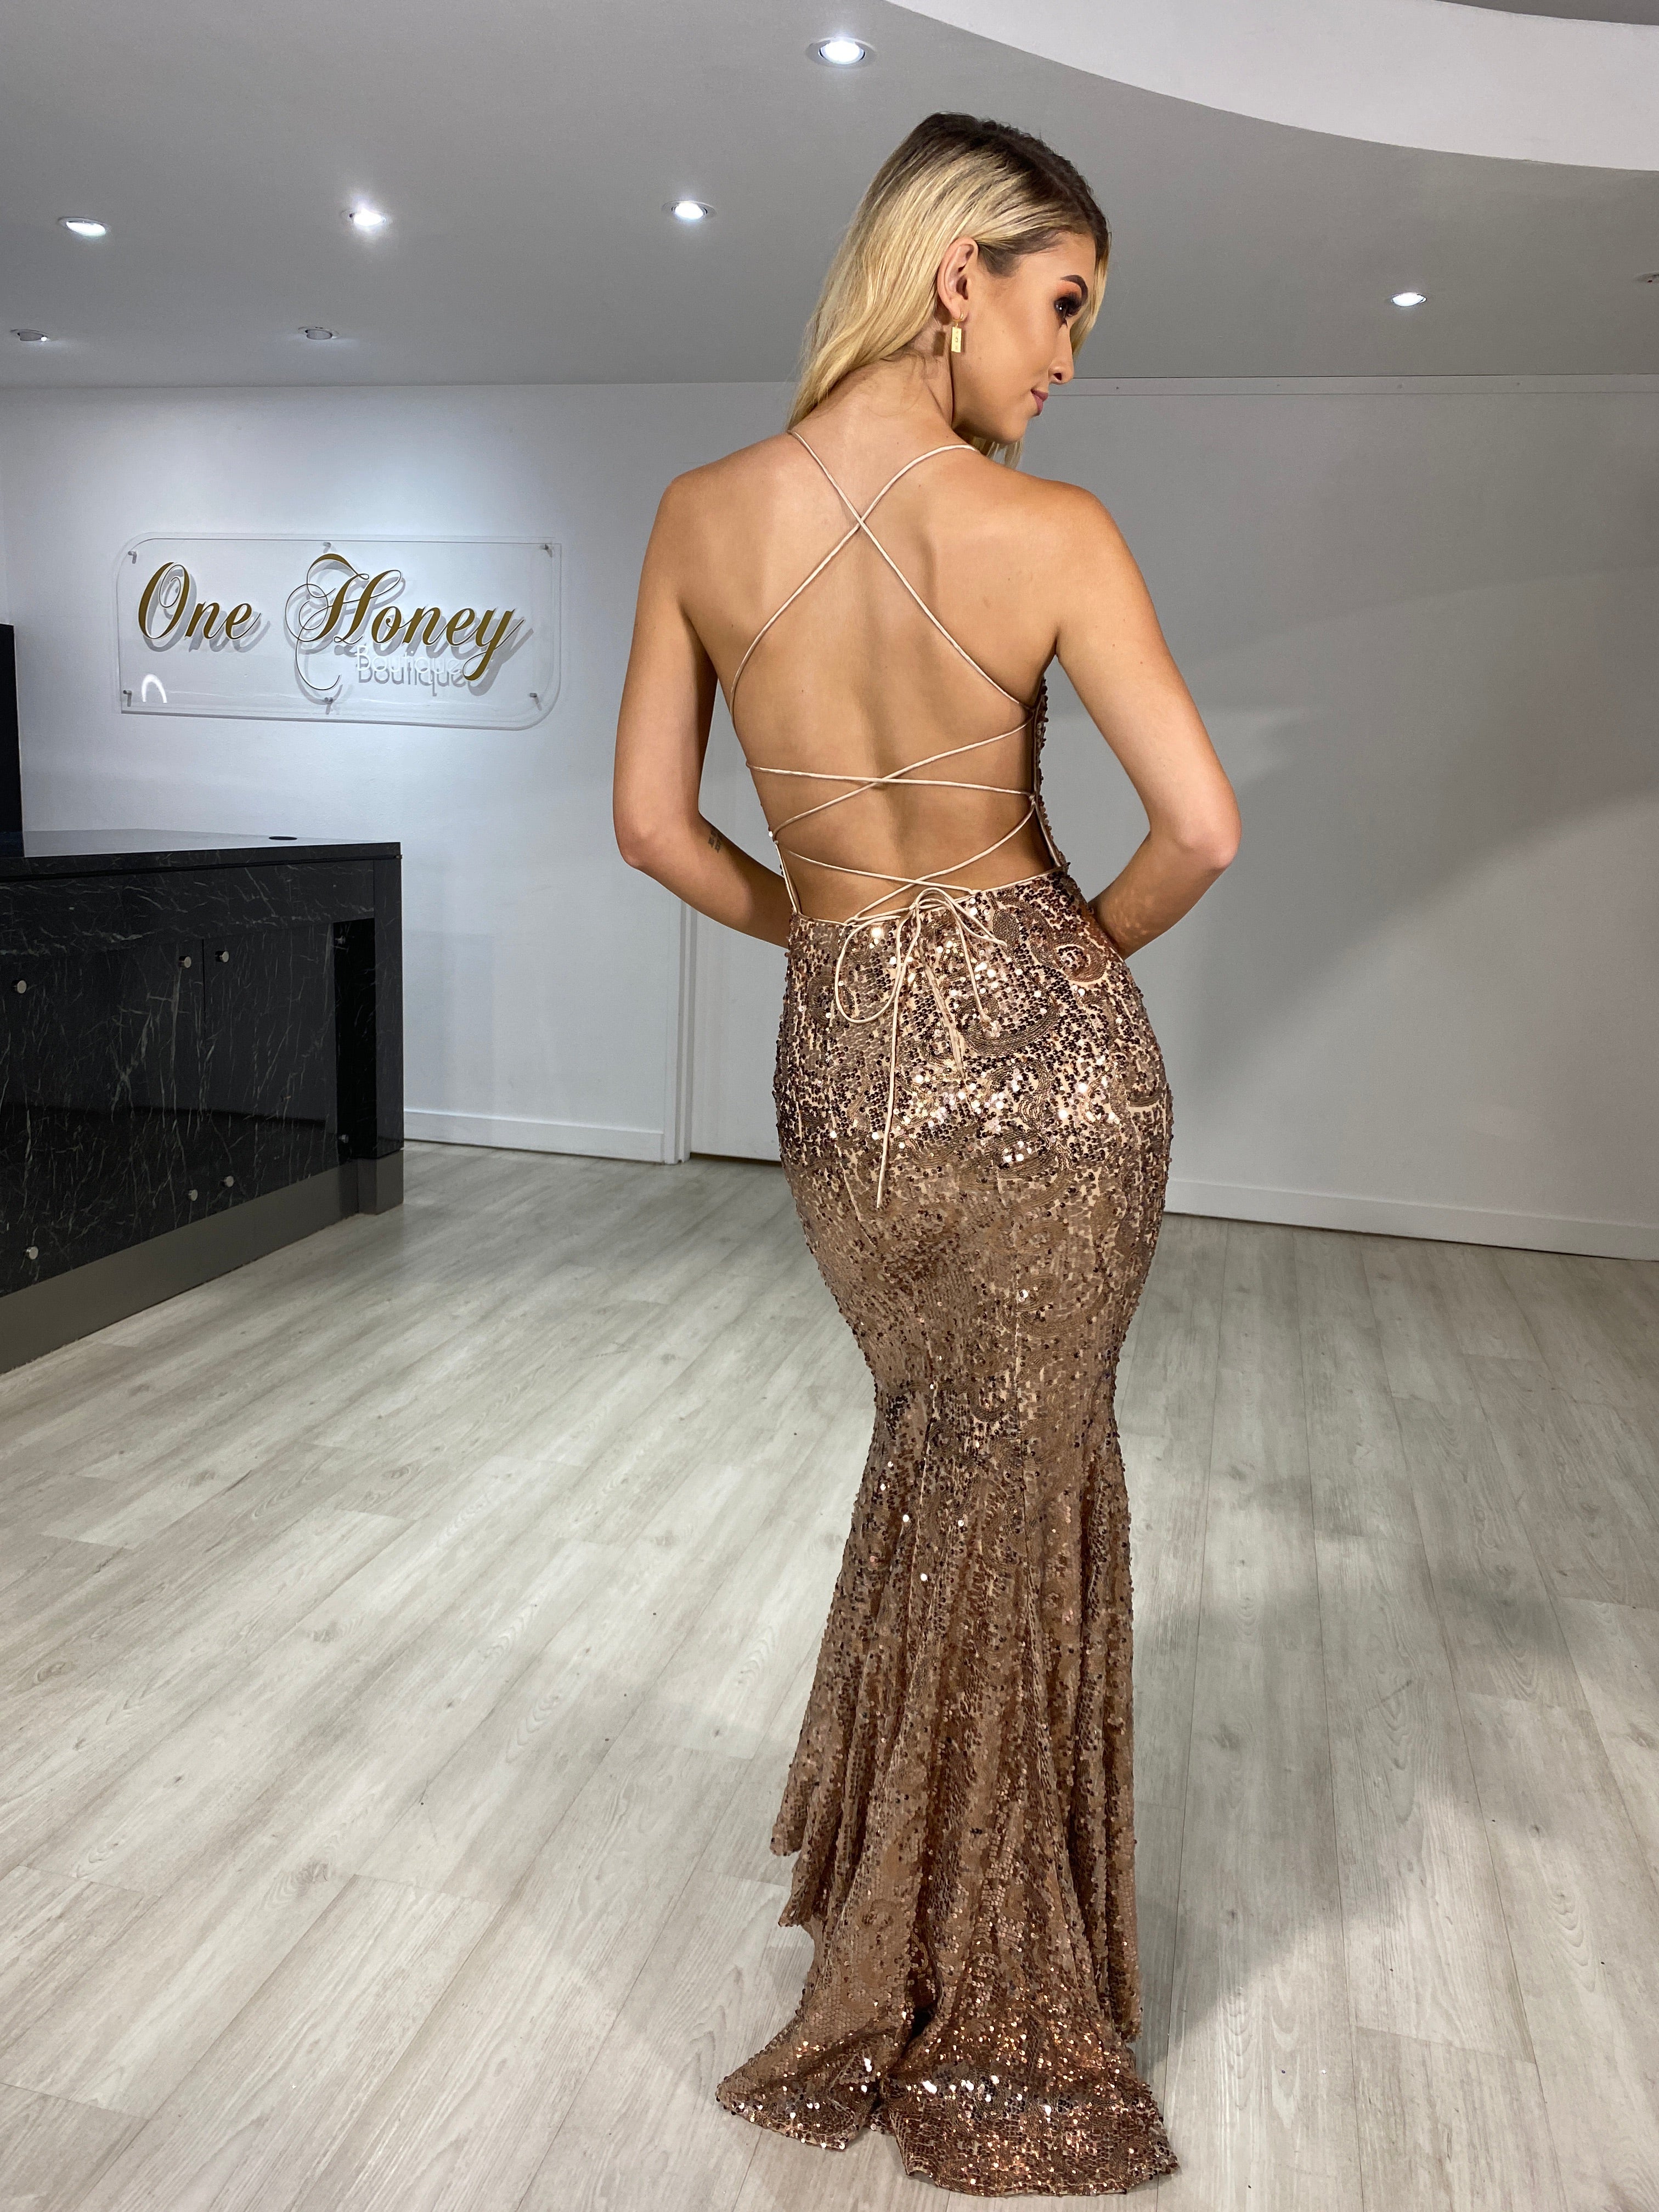 The ZOE Rose Gold Sequin Mermaid Formal Gown